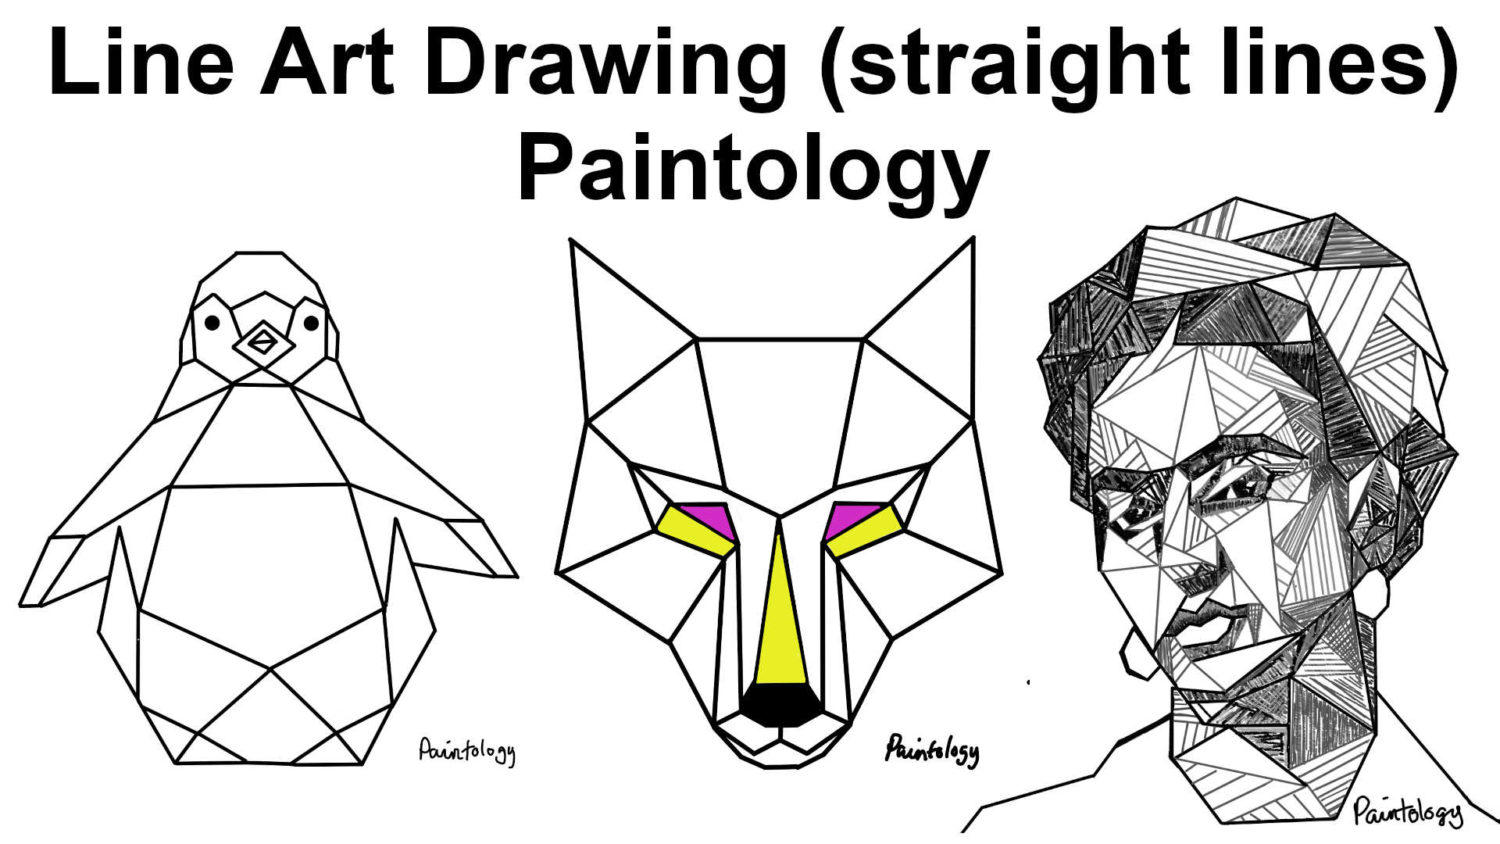 TAM  Draw a cat using only straight lines Design in theory and practice  1910  Facebook